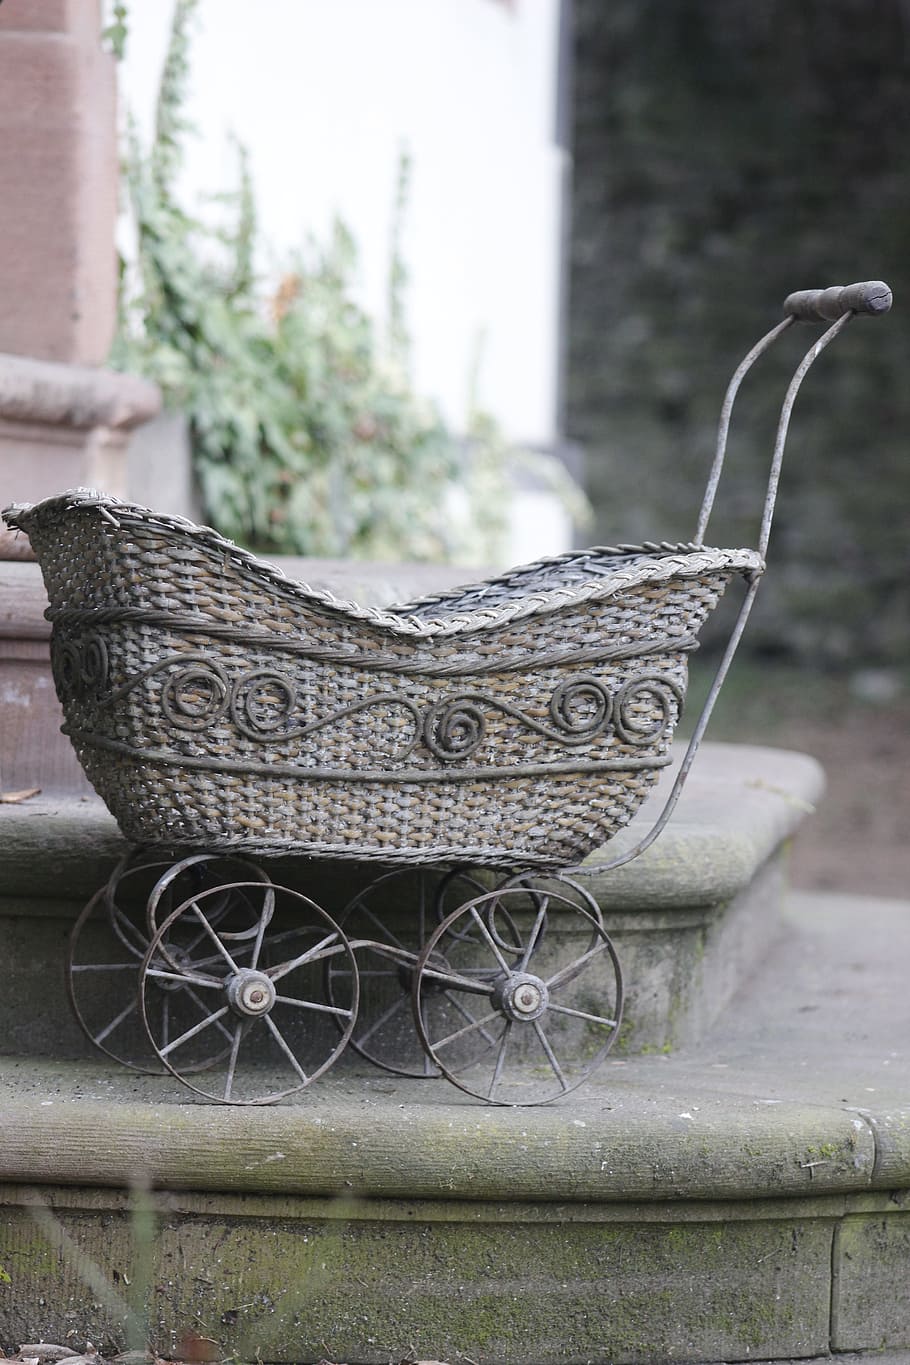 old, nature, antique, style, summer, rustic, baby carriage